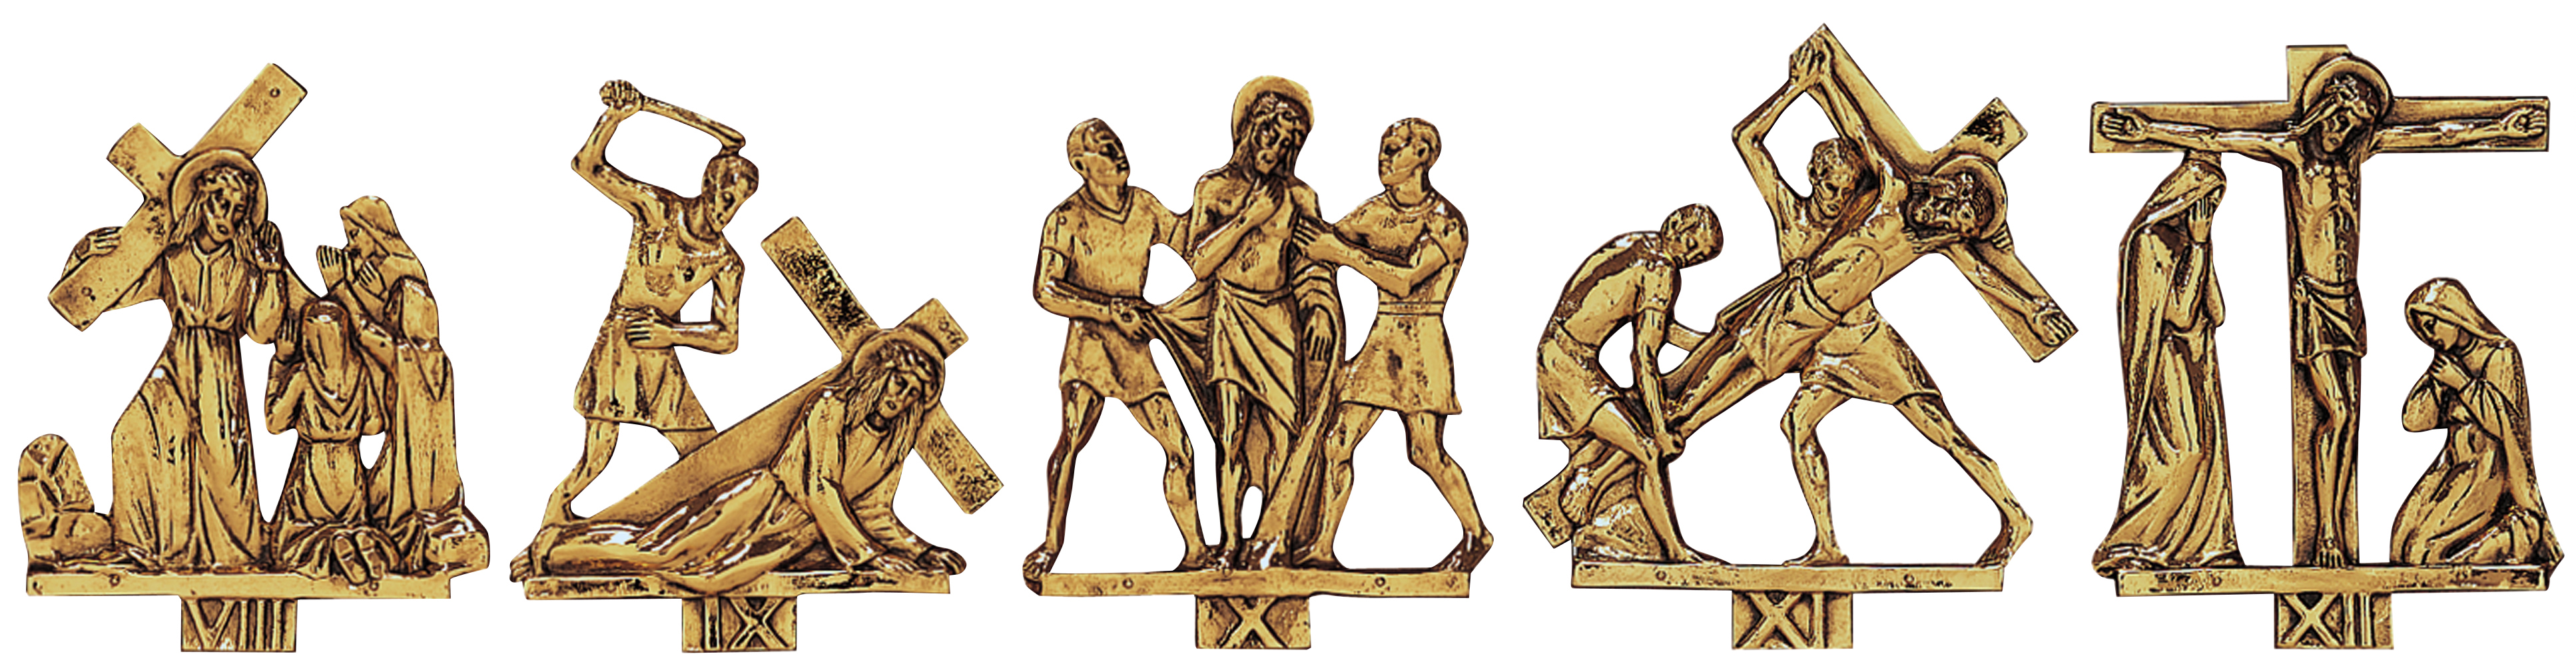 K379G Stations of the Cross